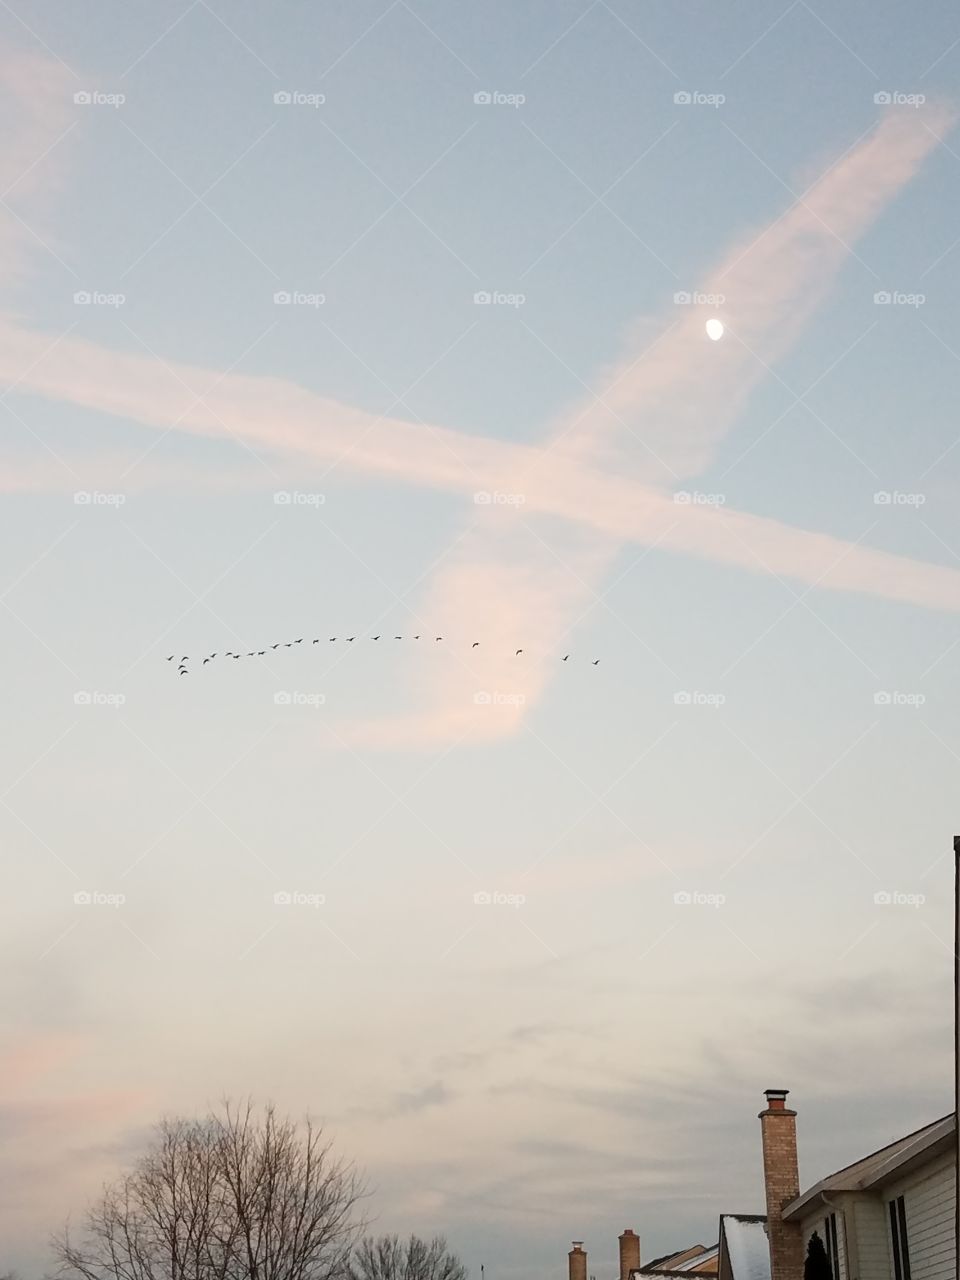 Moon, contrails, and geese